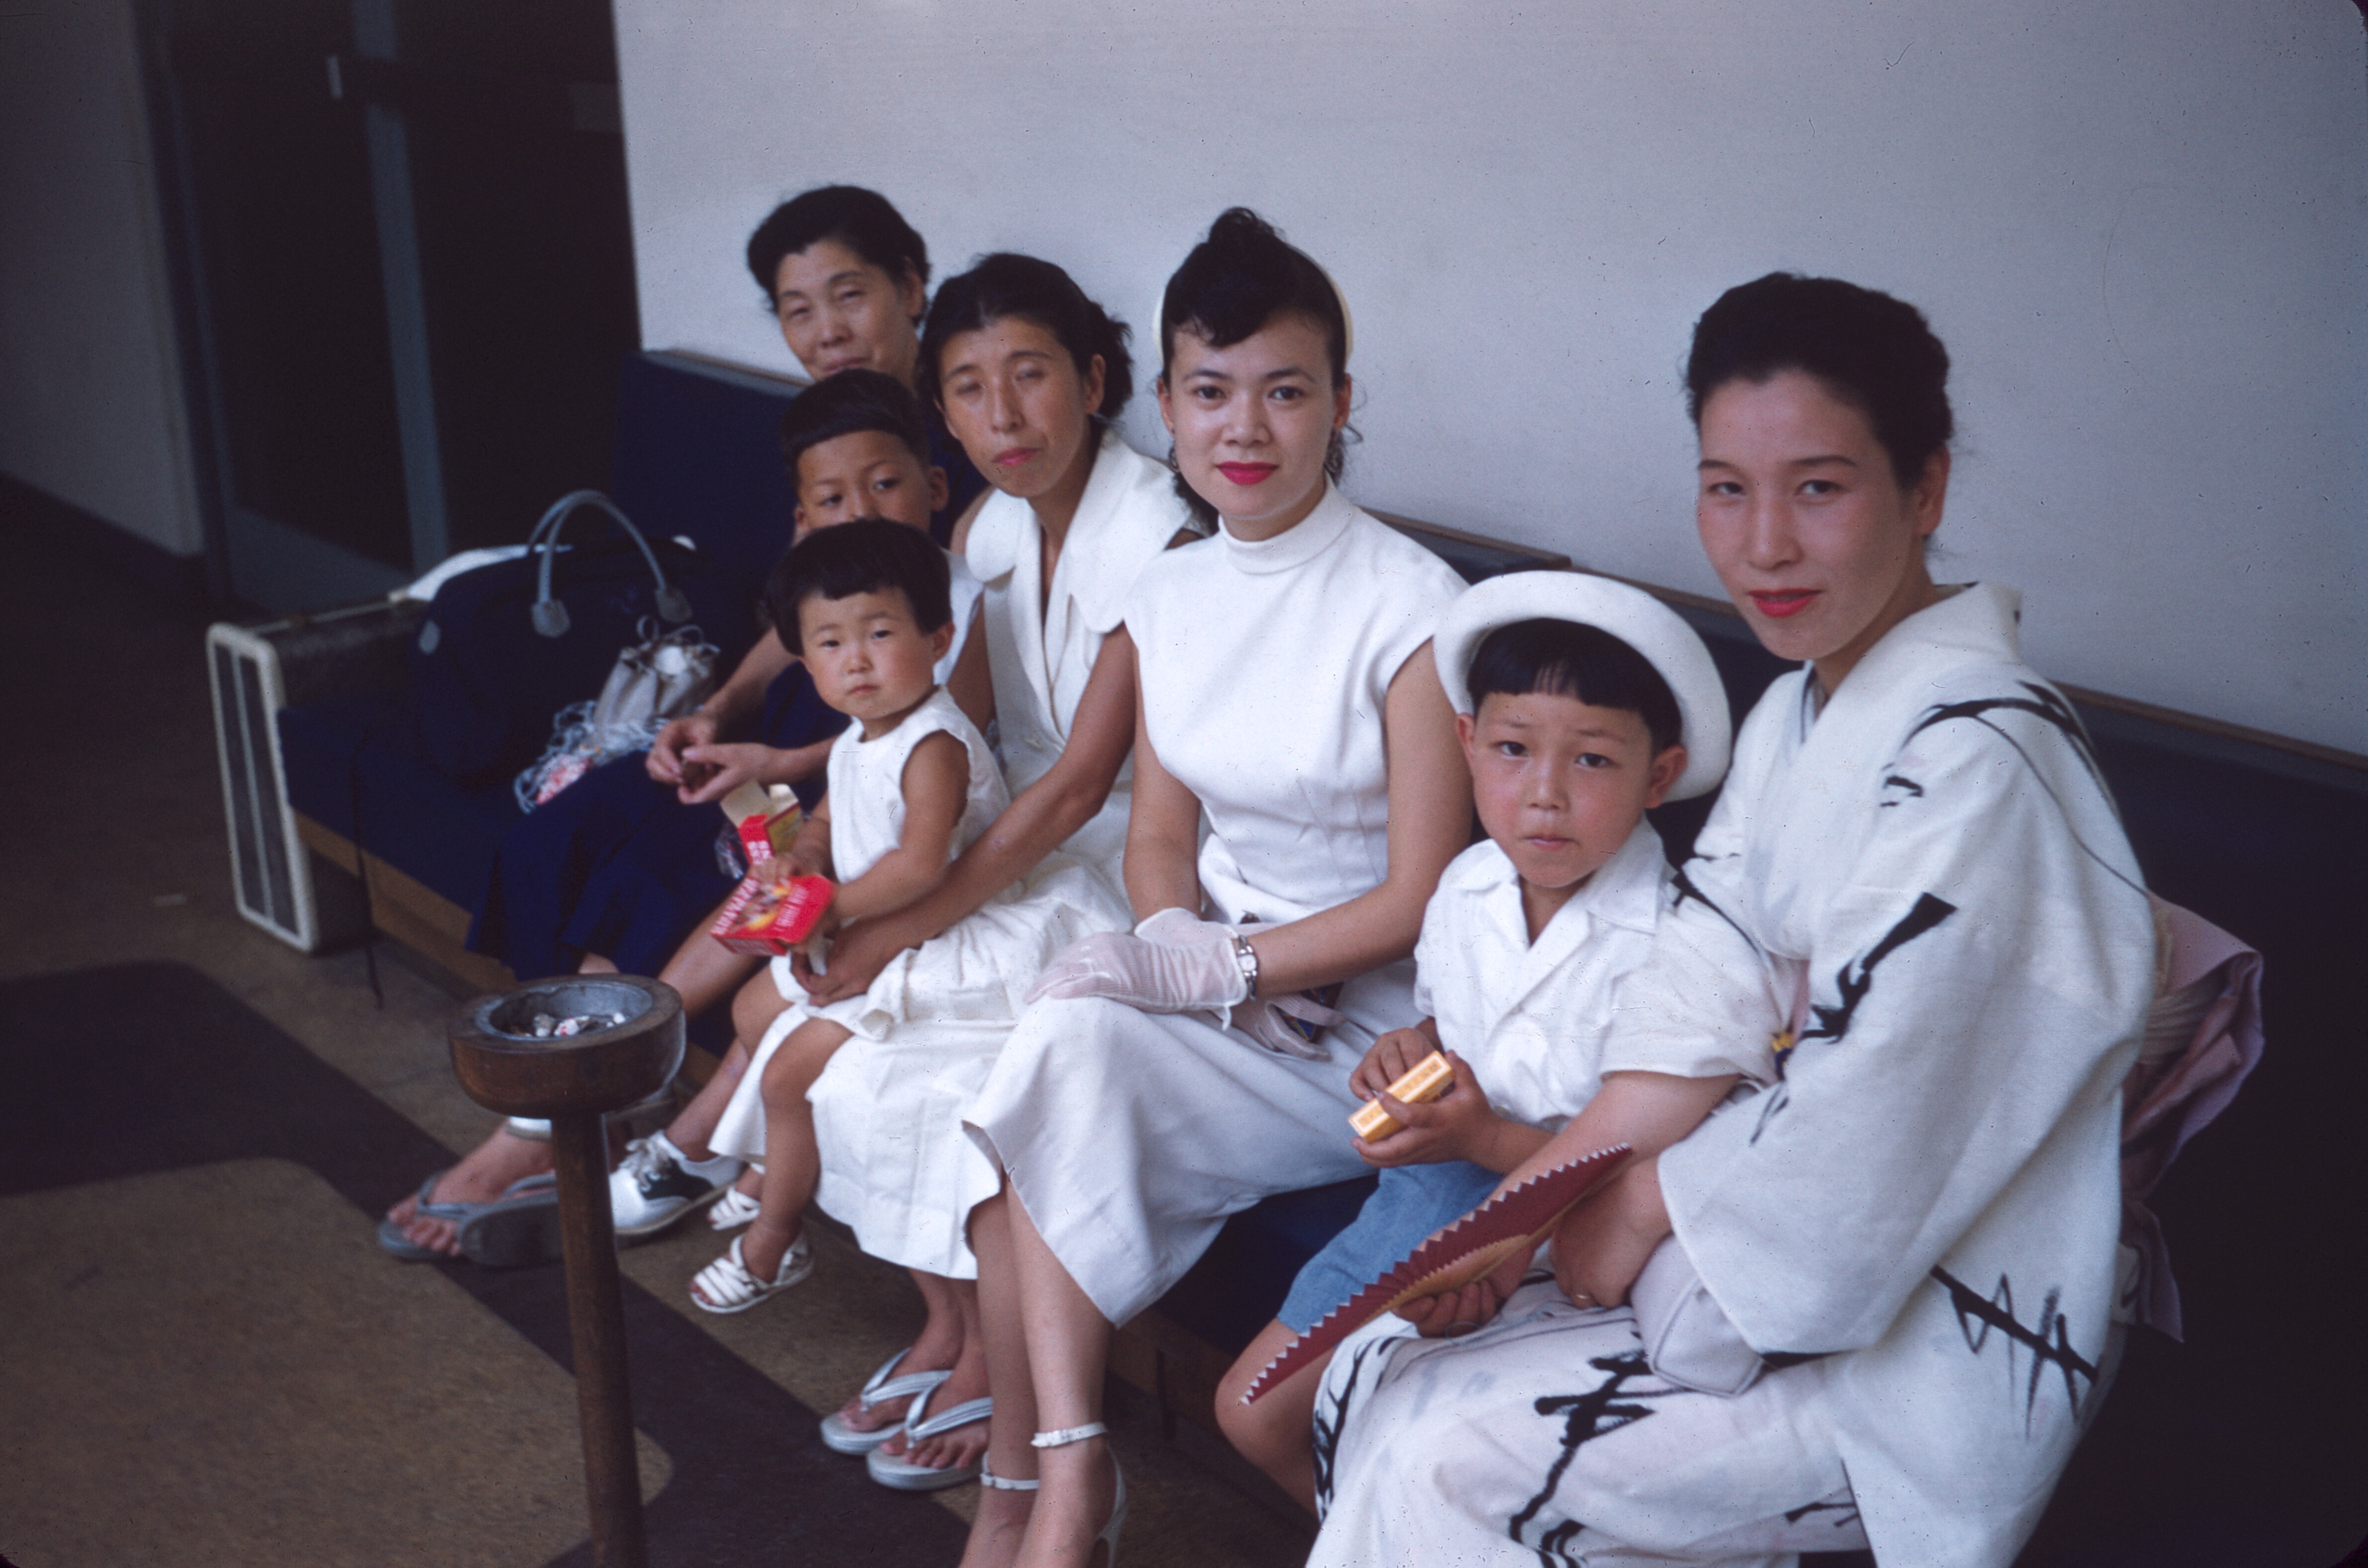 Toshiko and Family, Kyoto August 1956